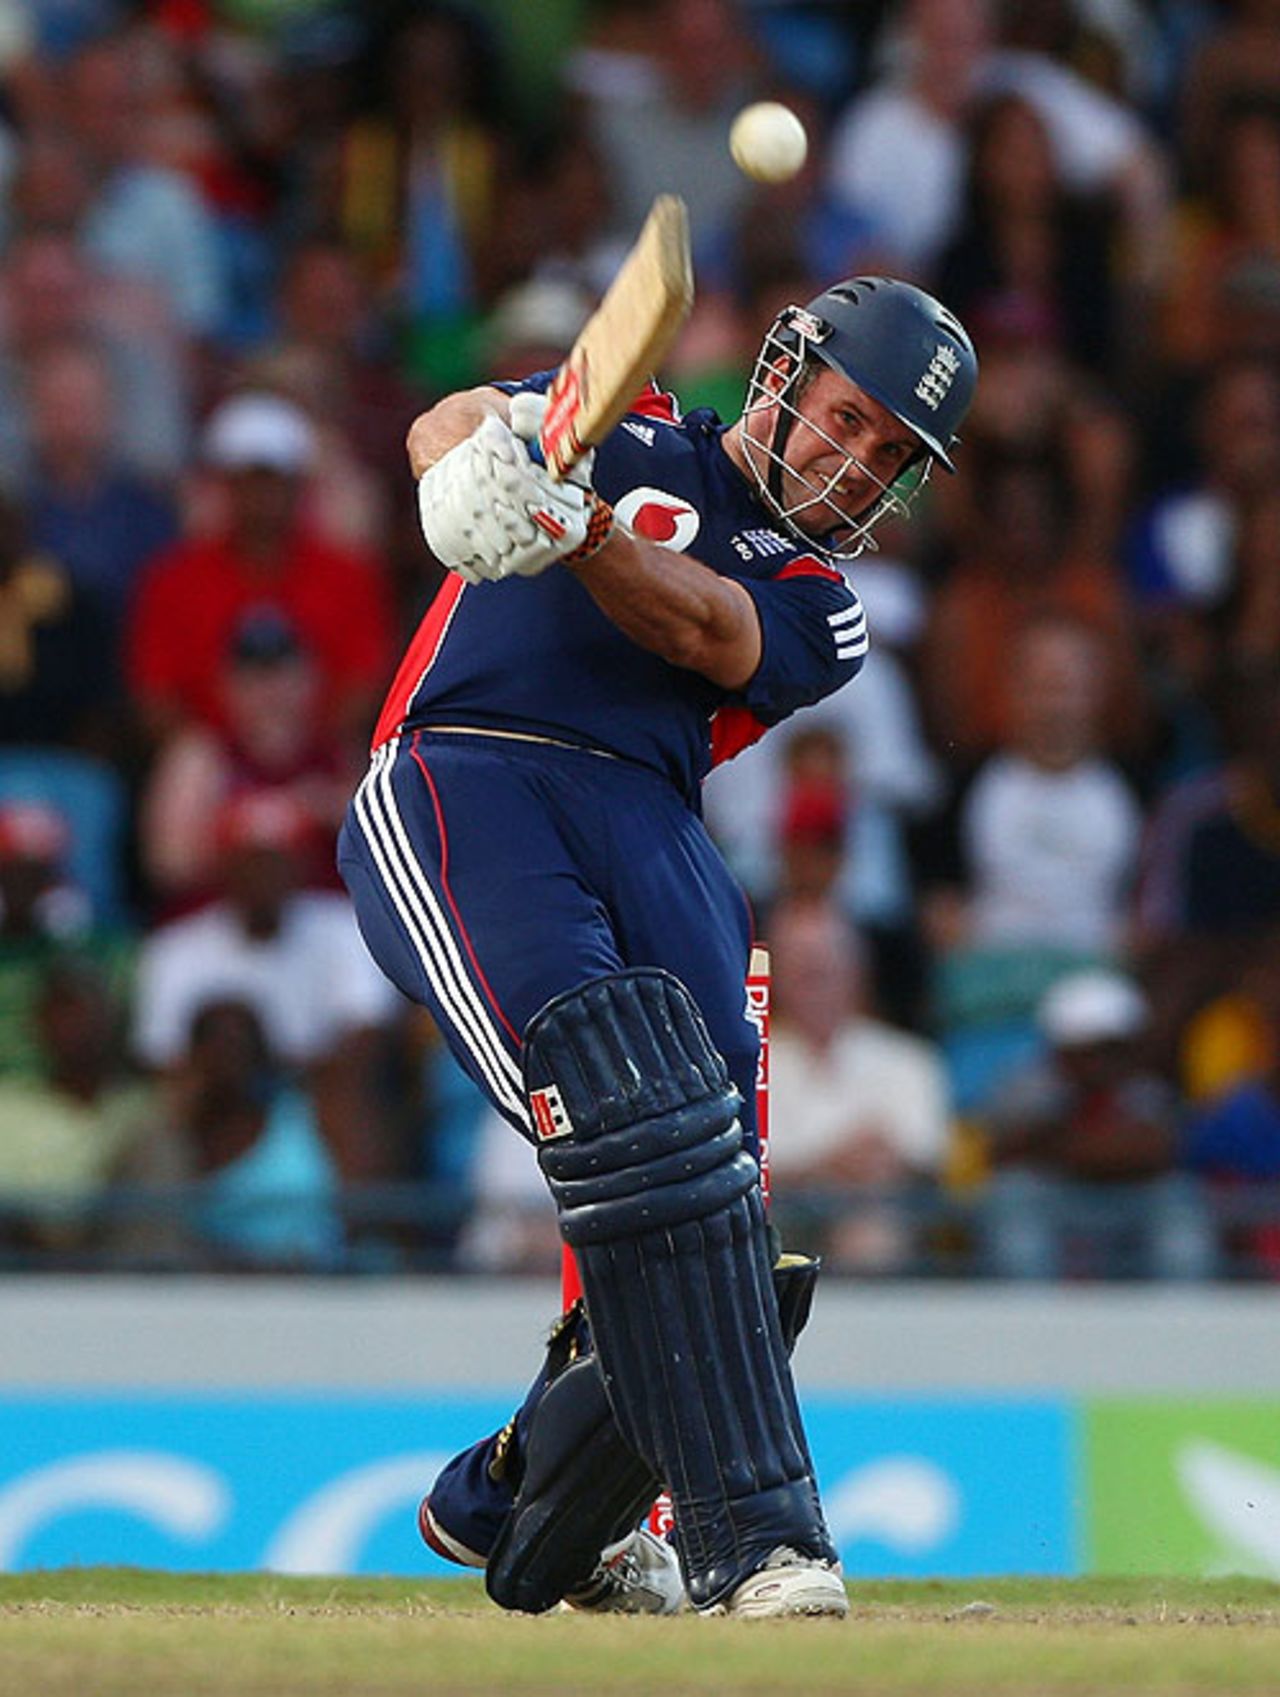 Andrew Strauss cracked an unbeaten 79 from 61 balls to seal a series-levelling win, West Indies v England, 4th ODI, Bridgetown, March 29, 2009